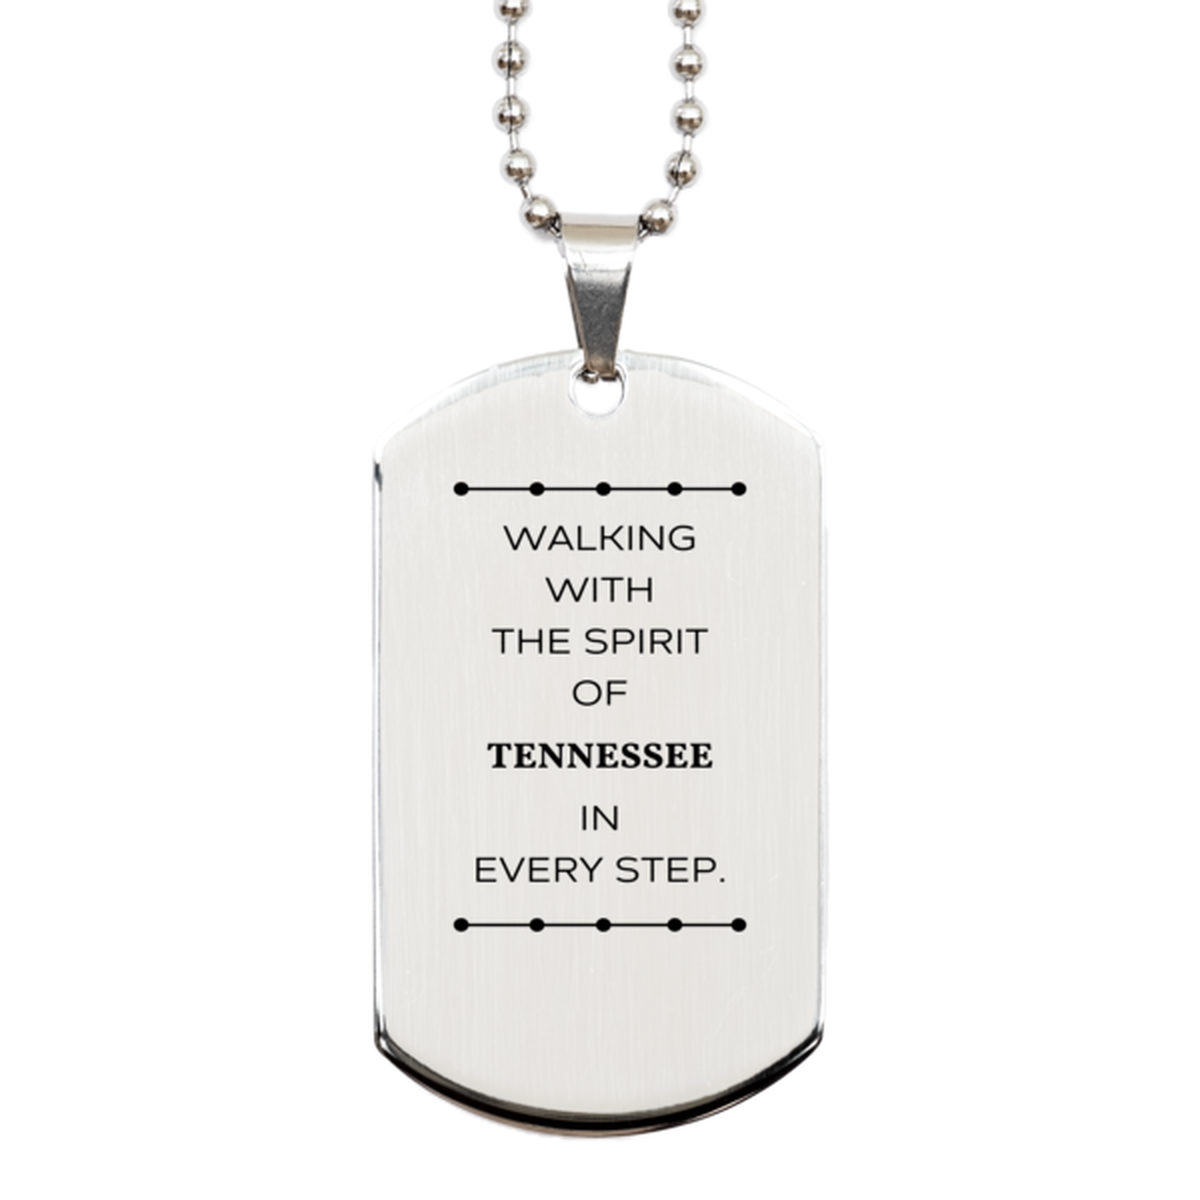 Tennessee Gifts, Walking with the spirit, Love Tennessee Birthday Christmas Silver Dog Tag For Tennessee People, Men, Women, Friends